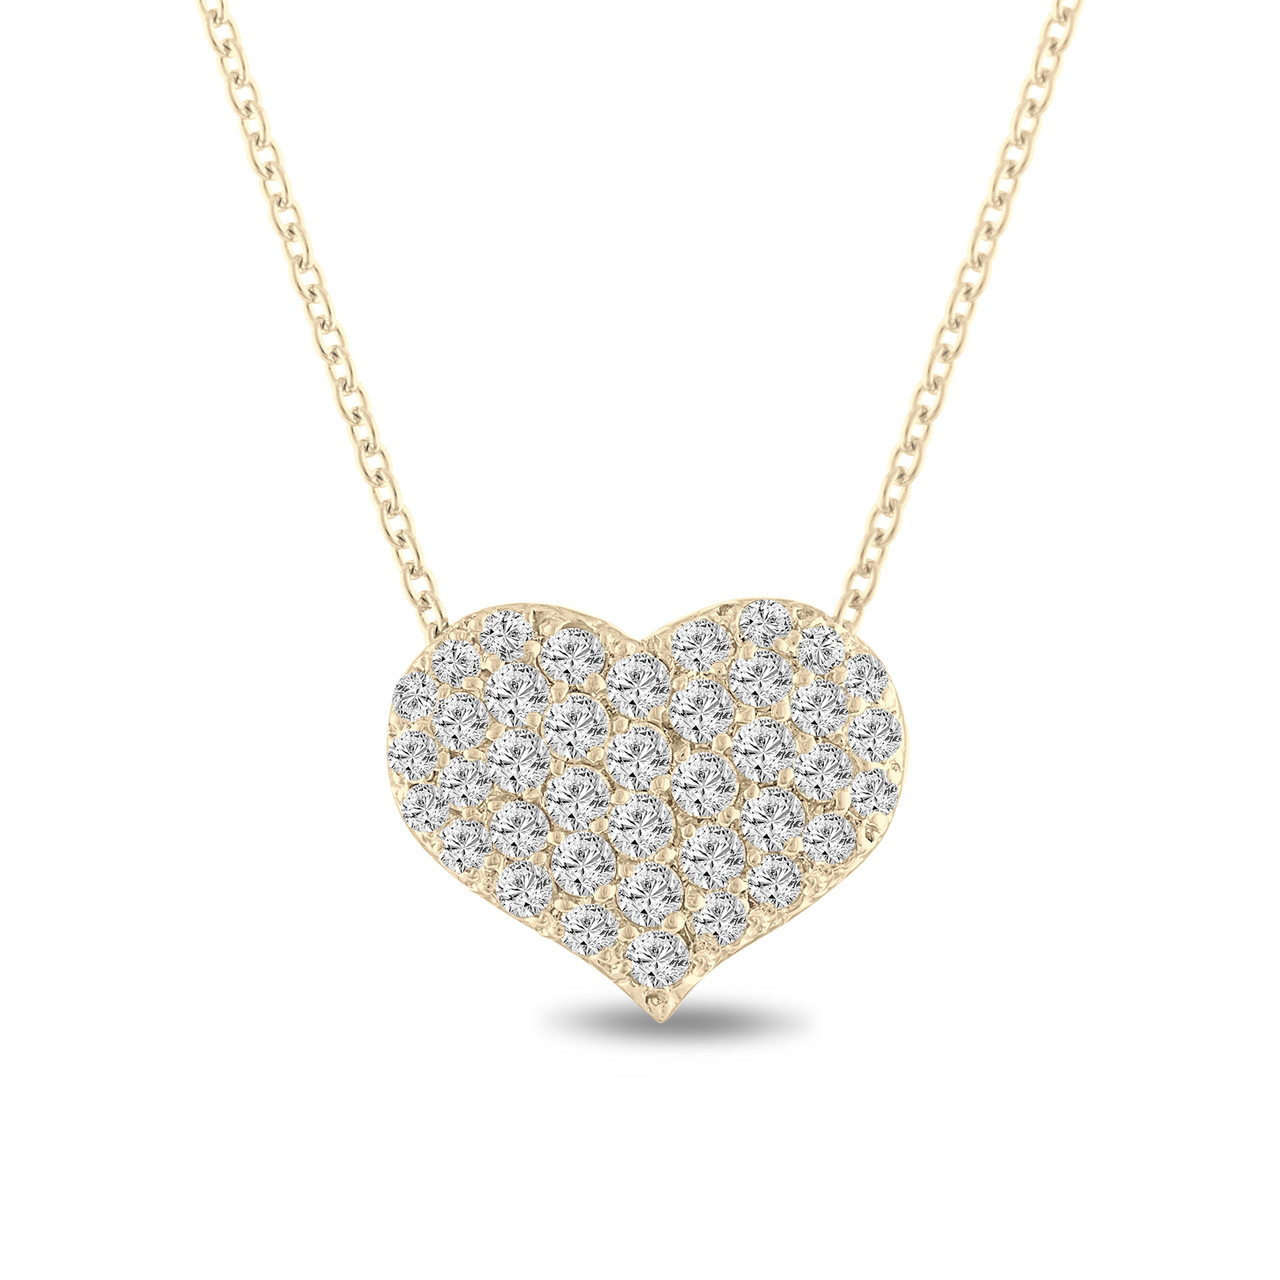 Big Love Heart Pendant and Chain Necklace in Gold | Uncommon James